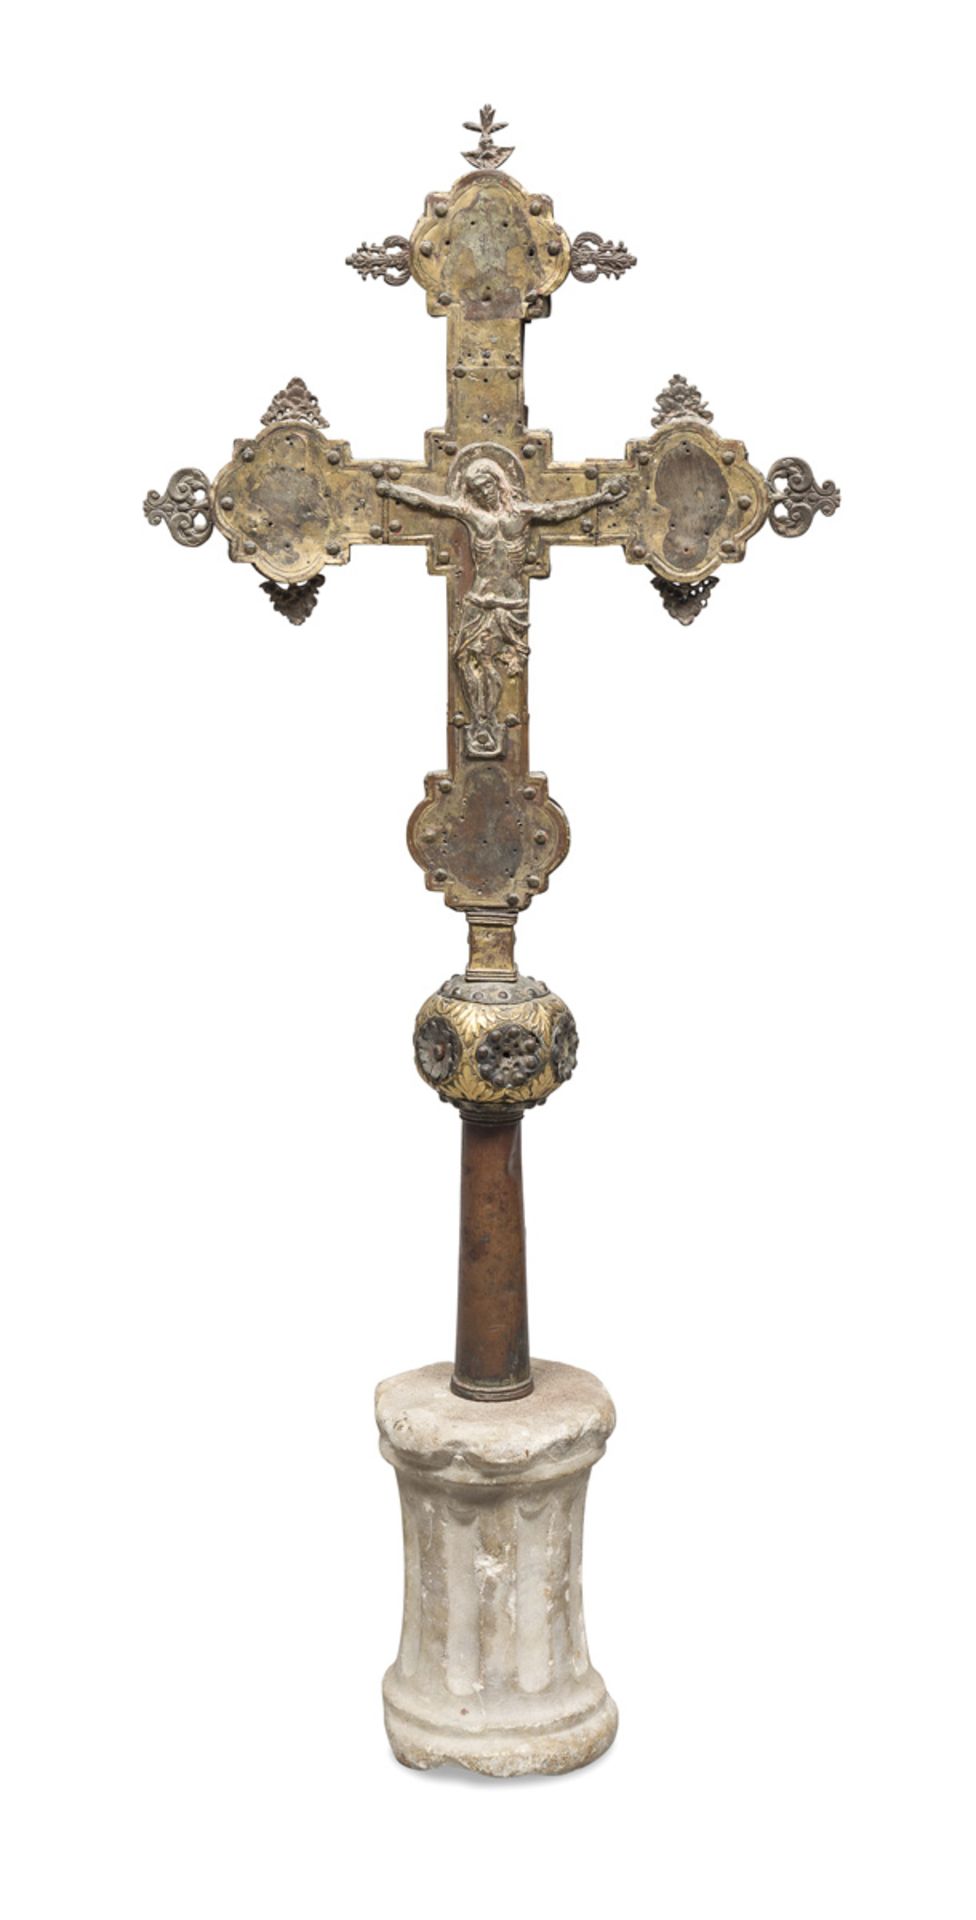 PROCESSIONAL CROSS IN ORMOLU - PROBABLY VENICE EARLY 16TH CENTURY